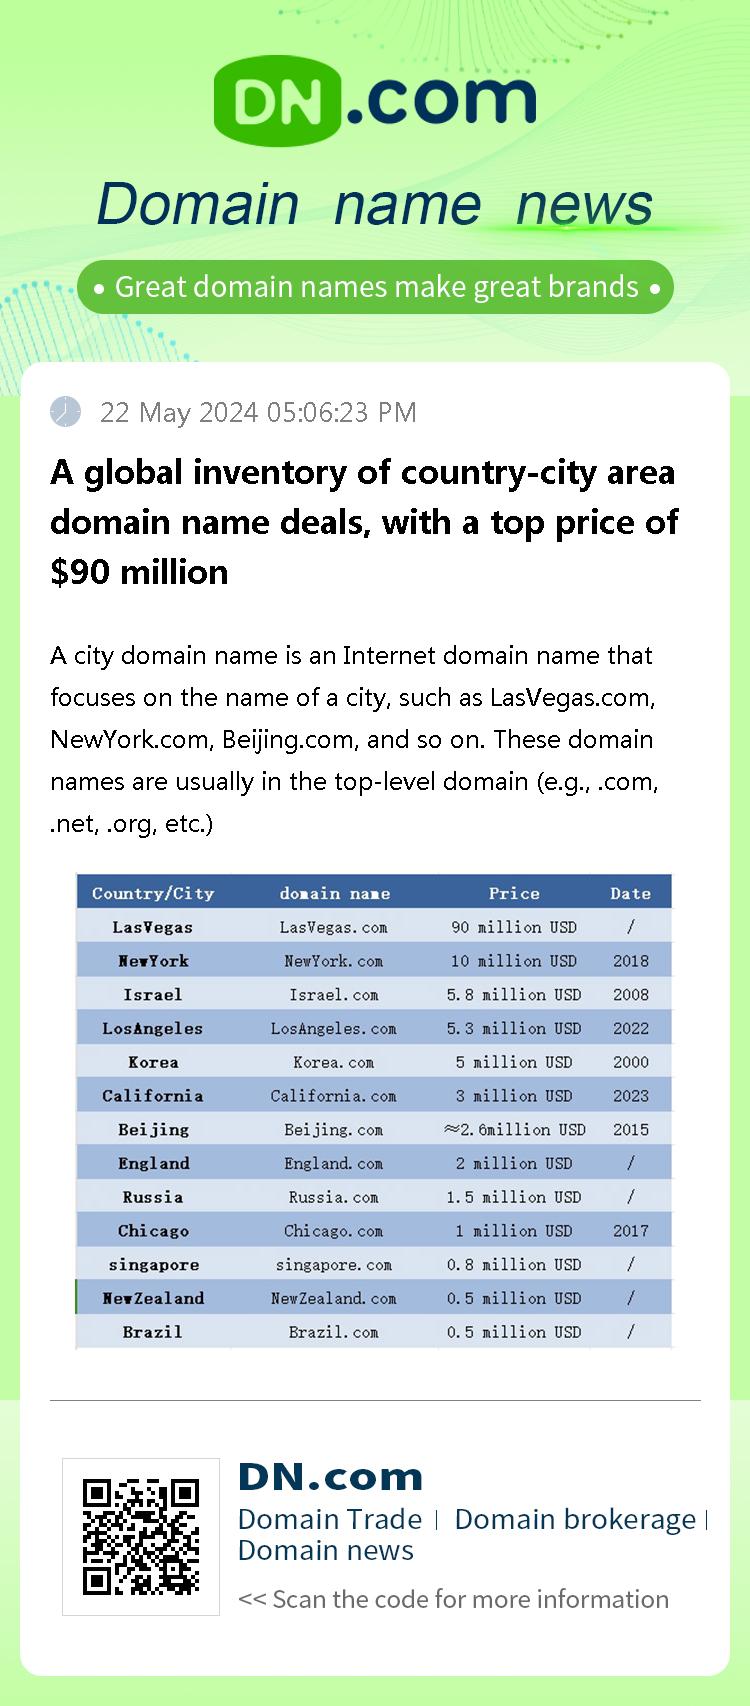 A global inventory of country-city area domain name deals, with a top price of $90 million